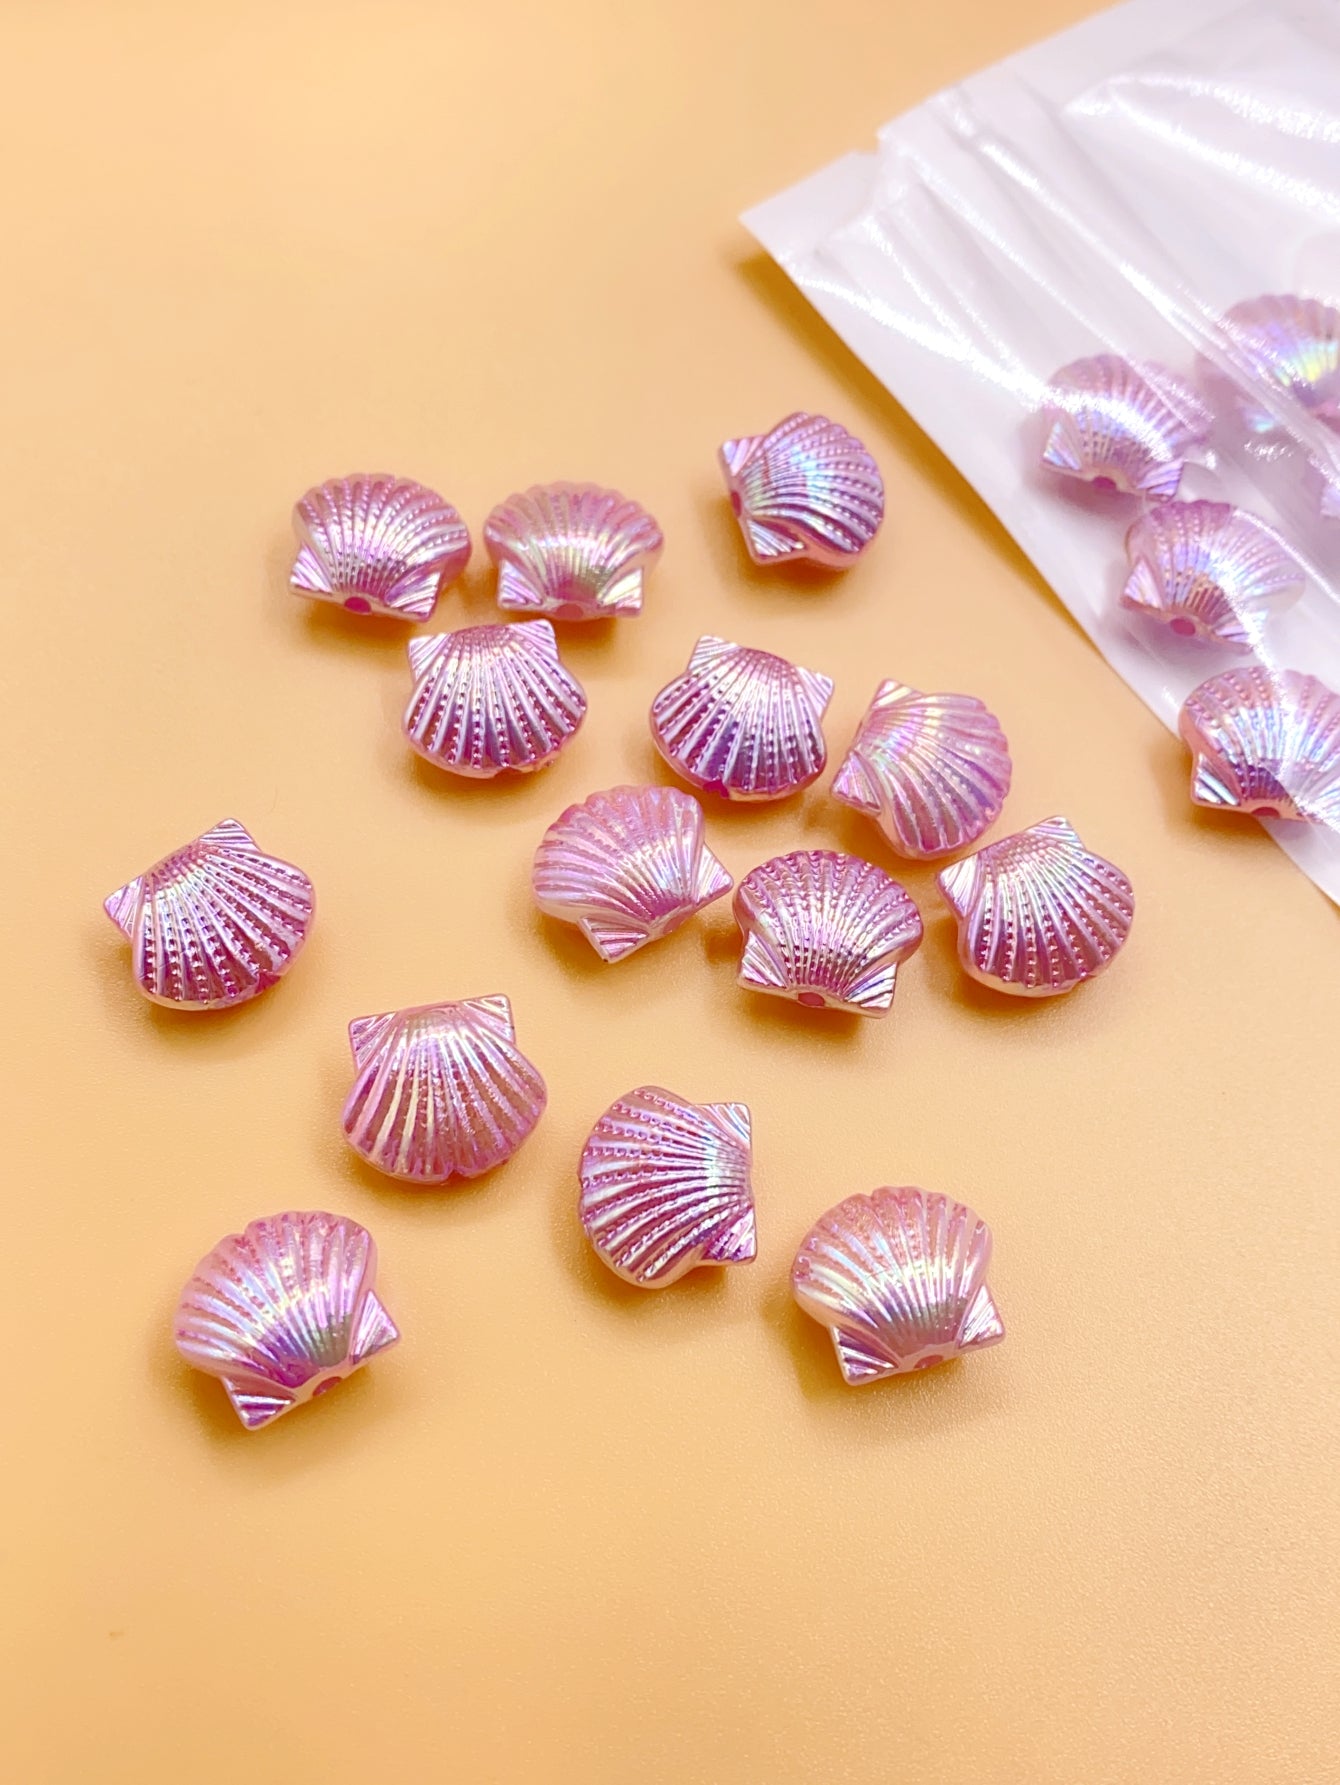 abs imitation pearl shaped straight hole confetti shell loose pearl Japanese earrings material diy jewelry accessories pearl